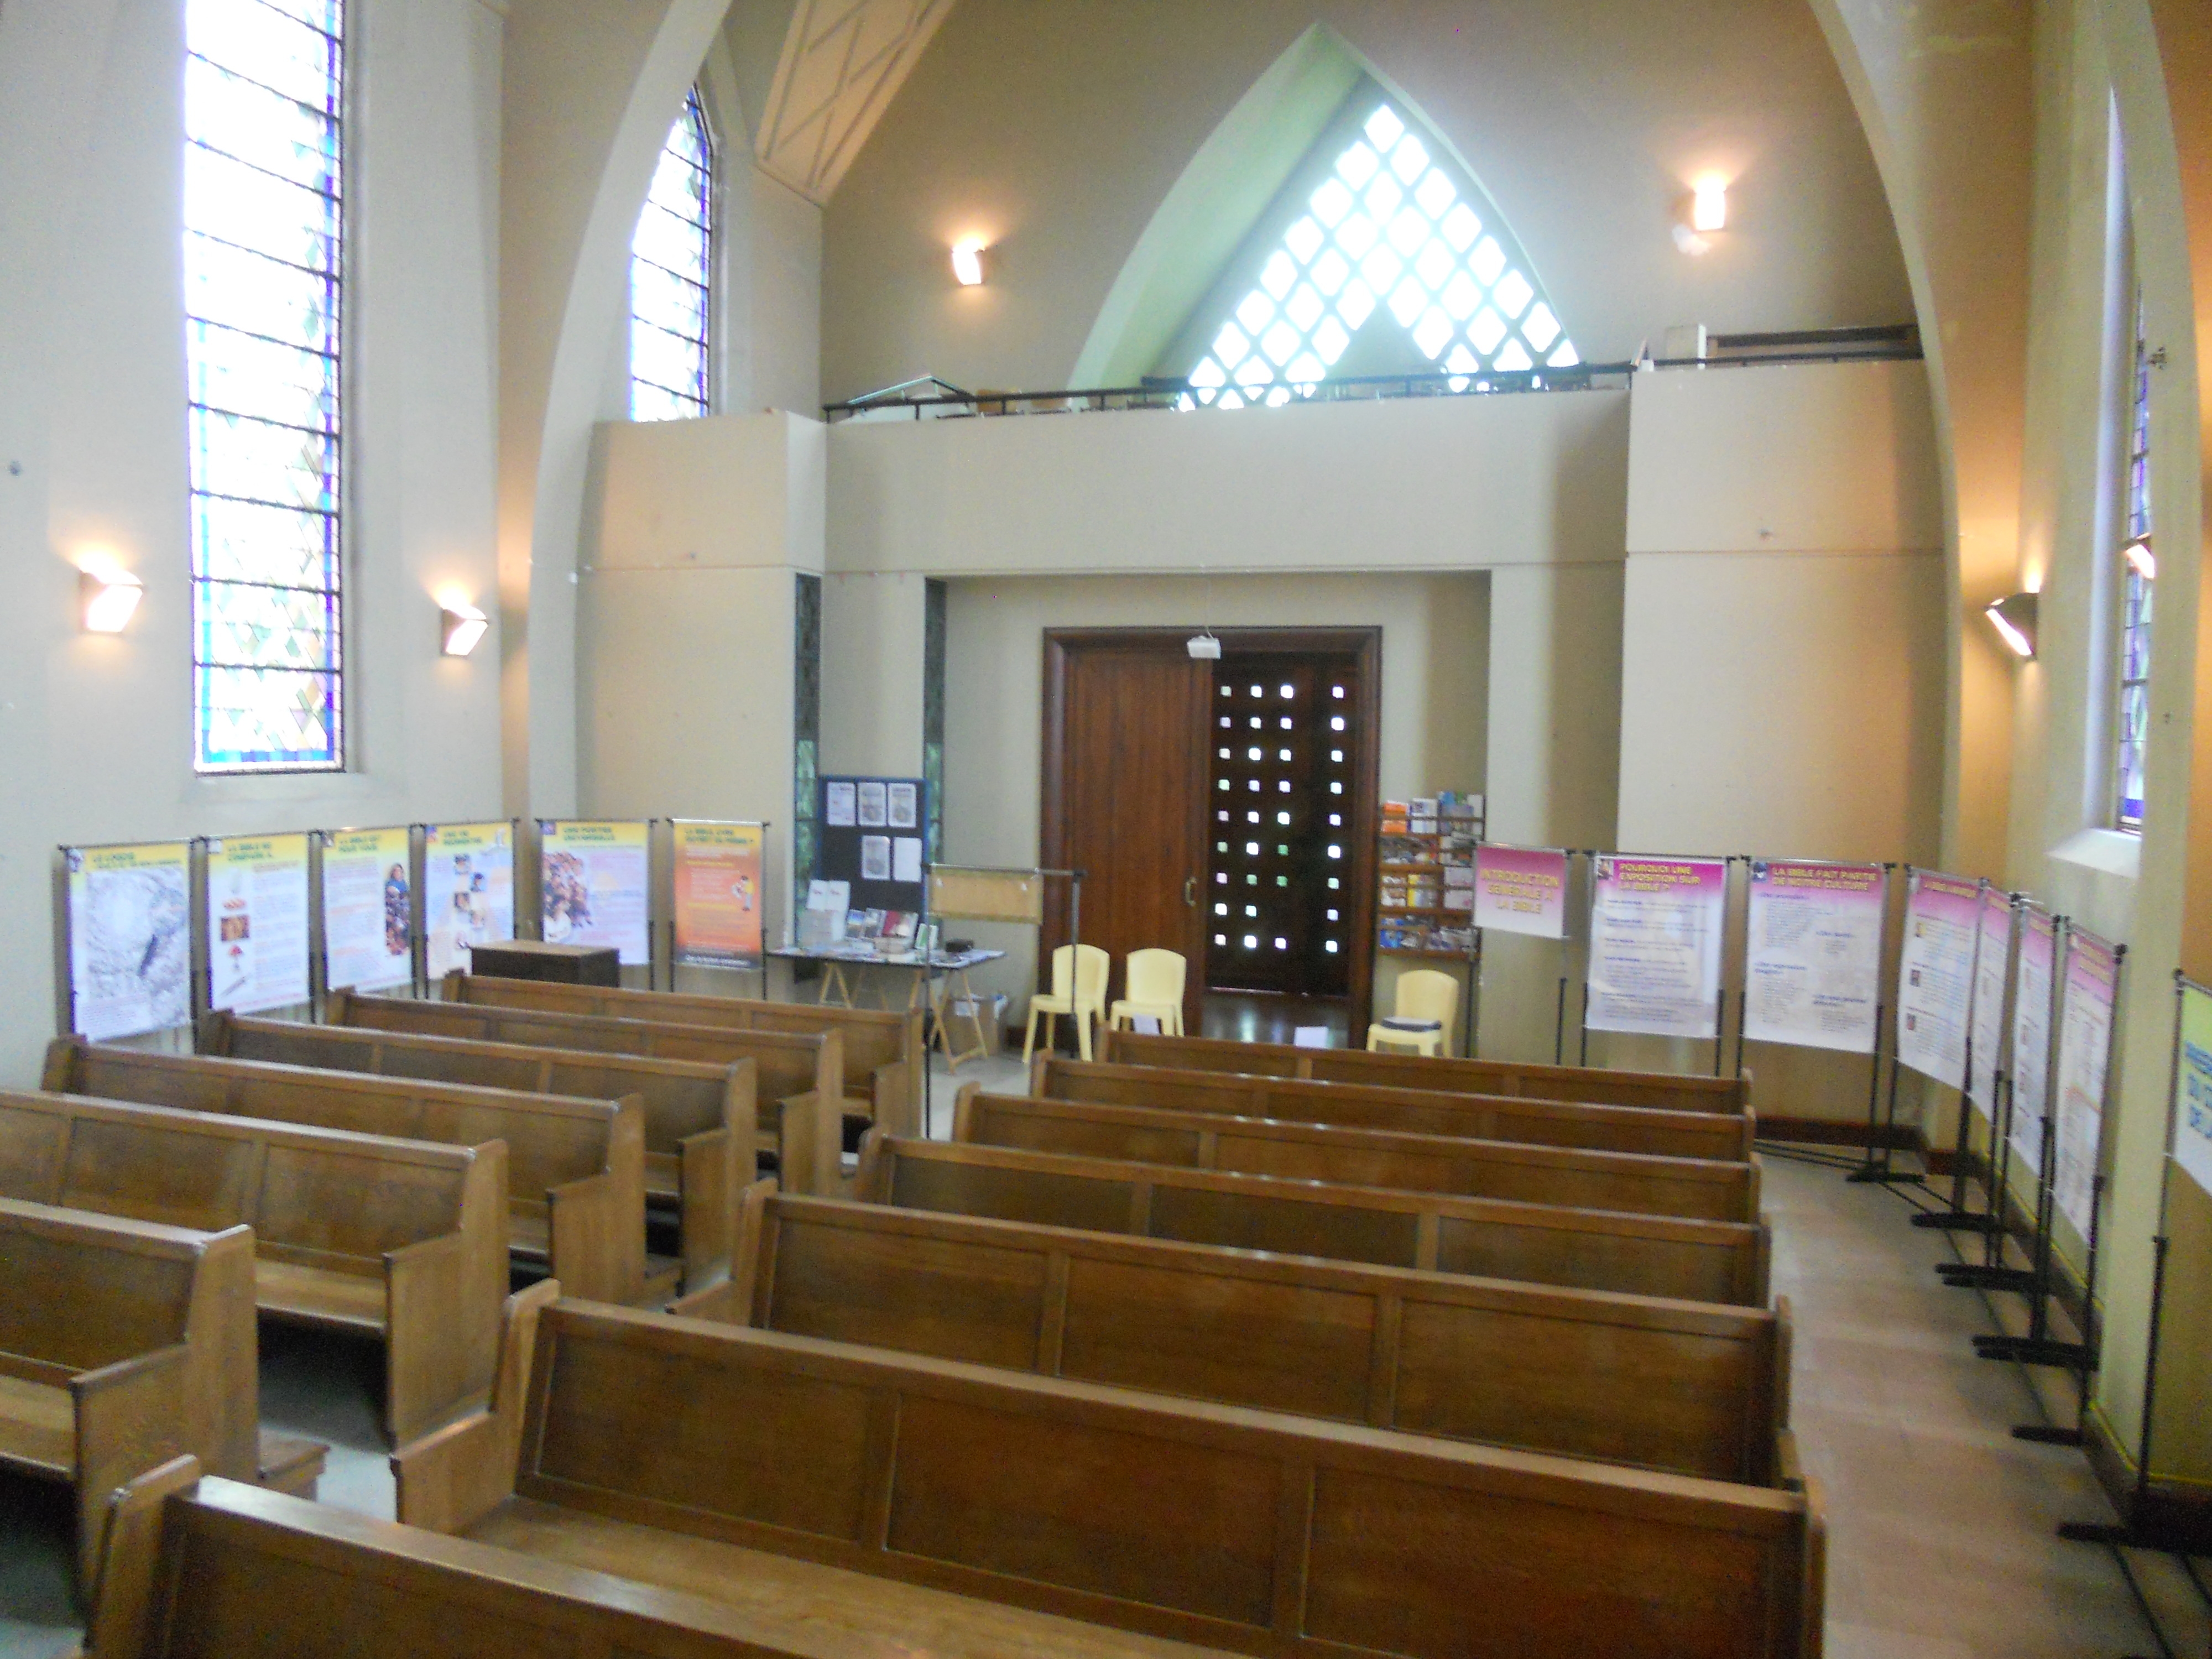 The exhibition set up in the church